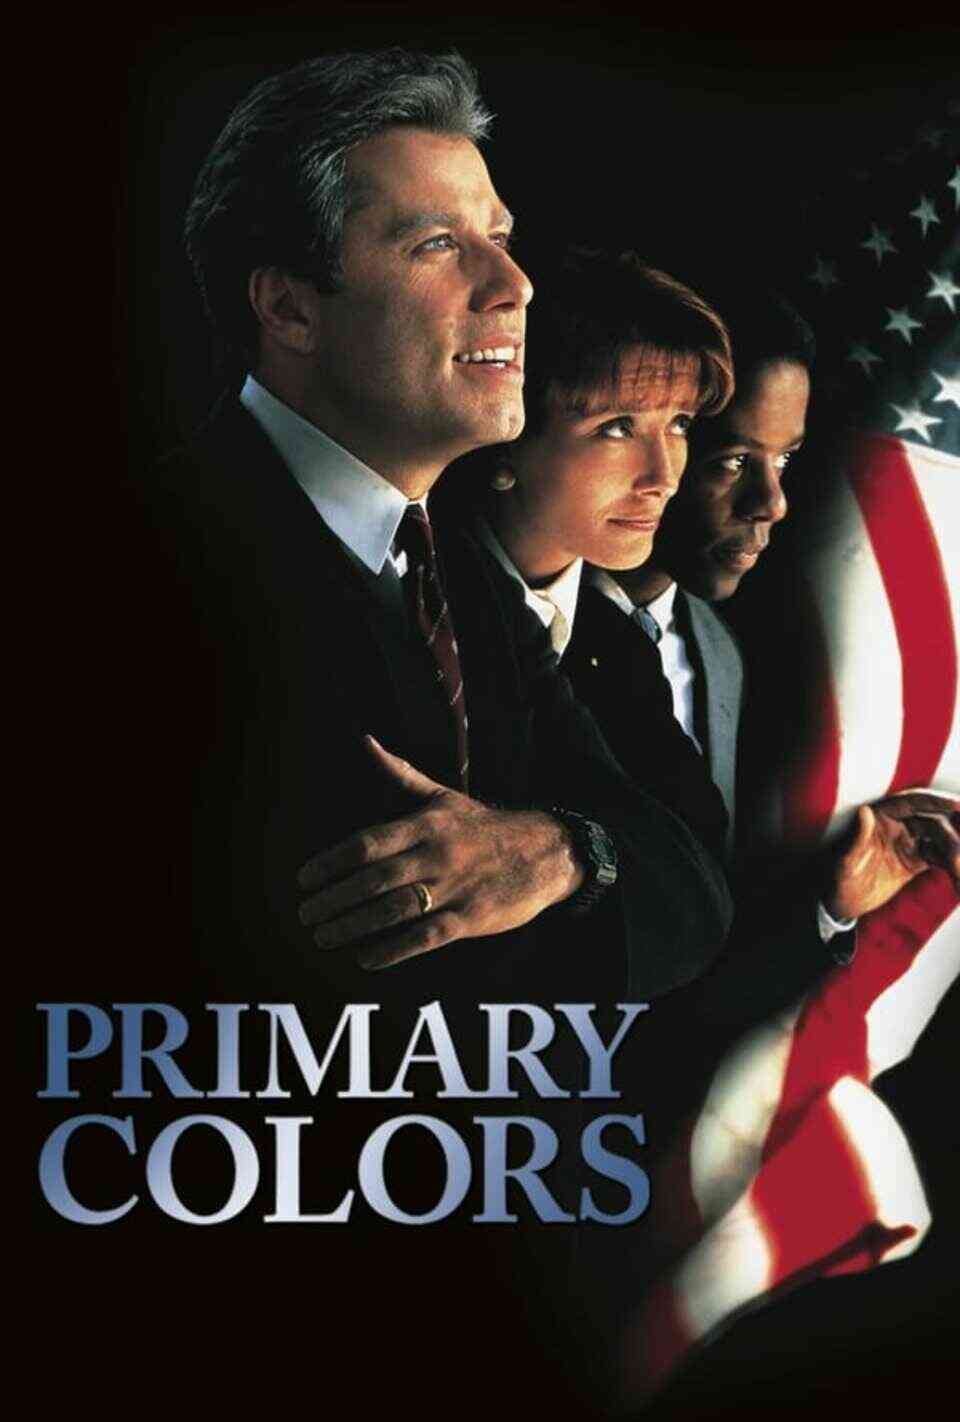 Read Primary Colors screenplay.